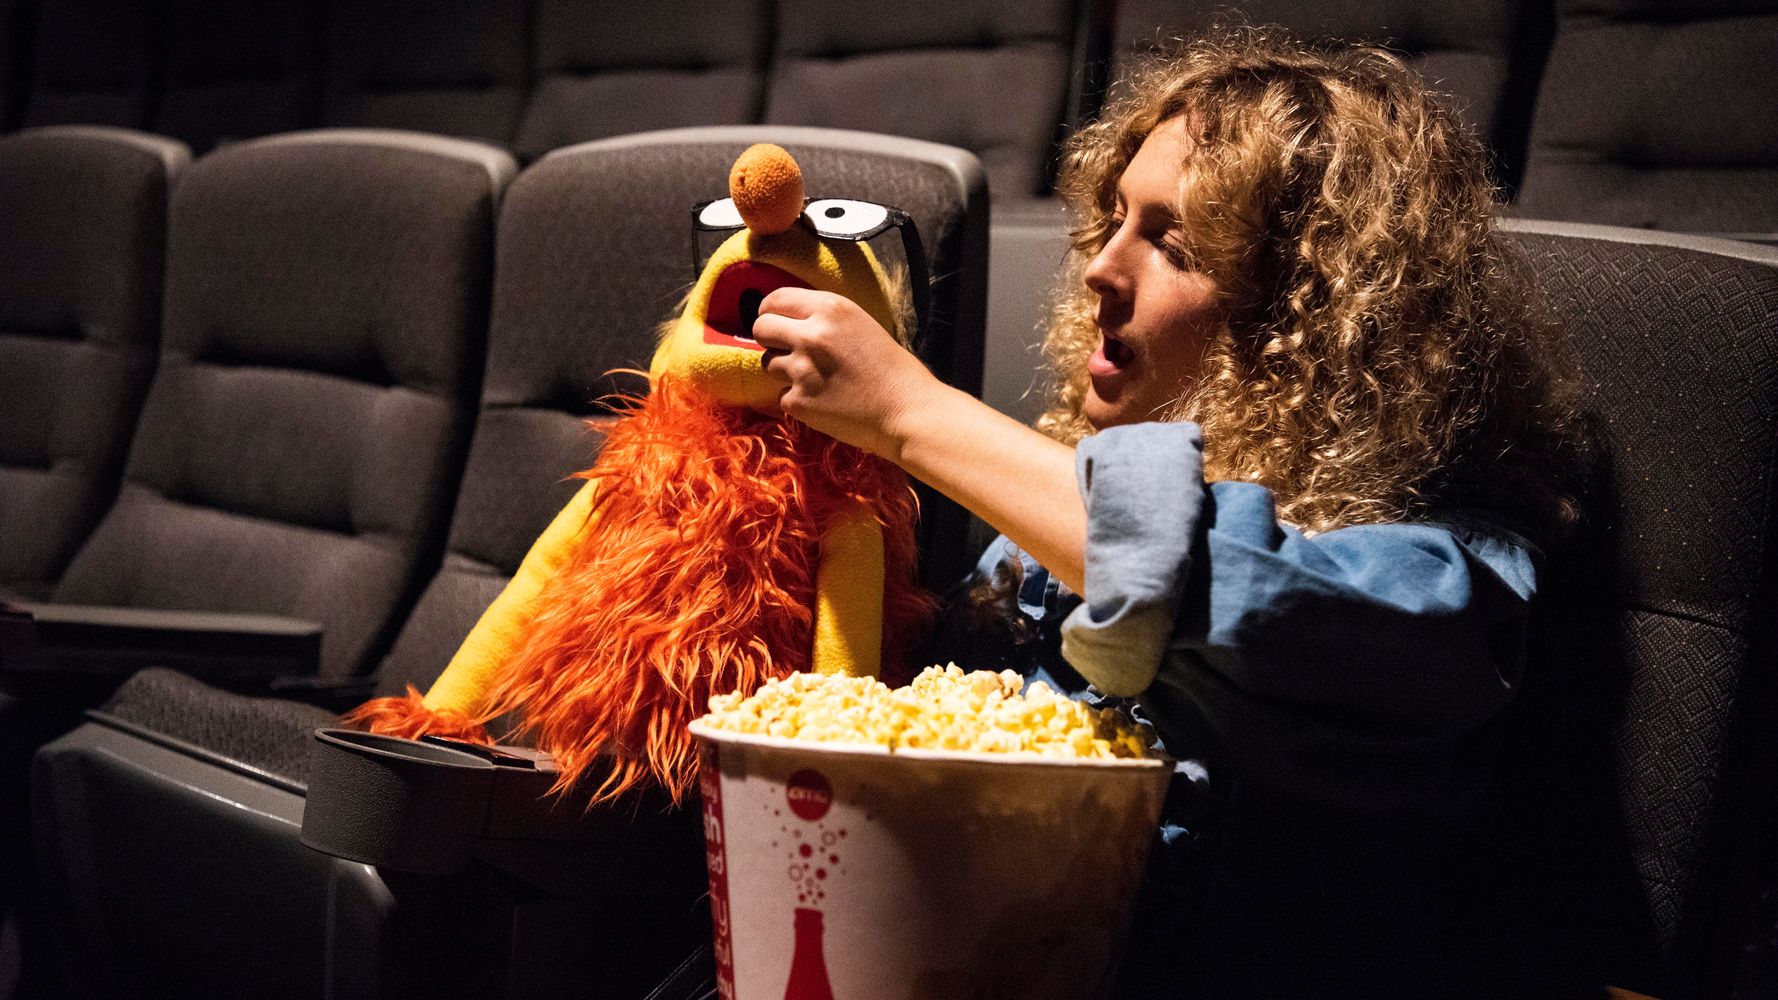 I Took My Puppet Boyfriend To See The New R-Rated Puppet Movie | HuffPost  Entertainment